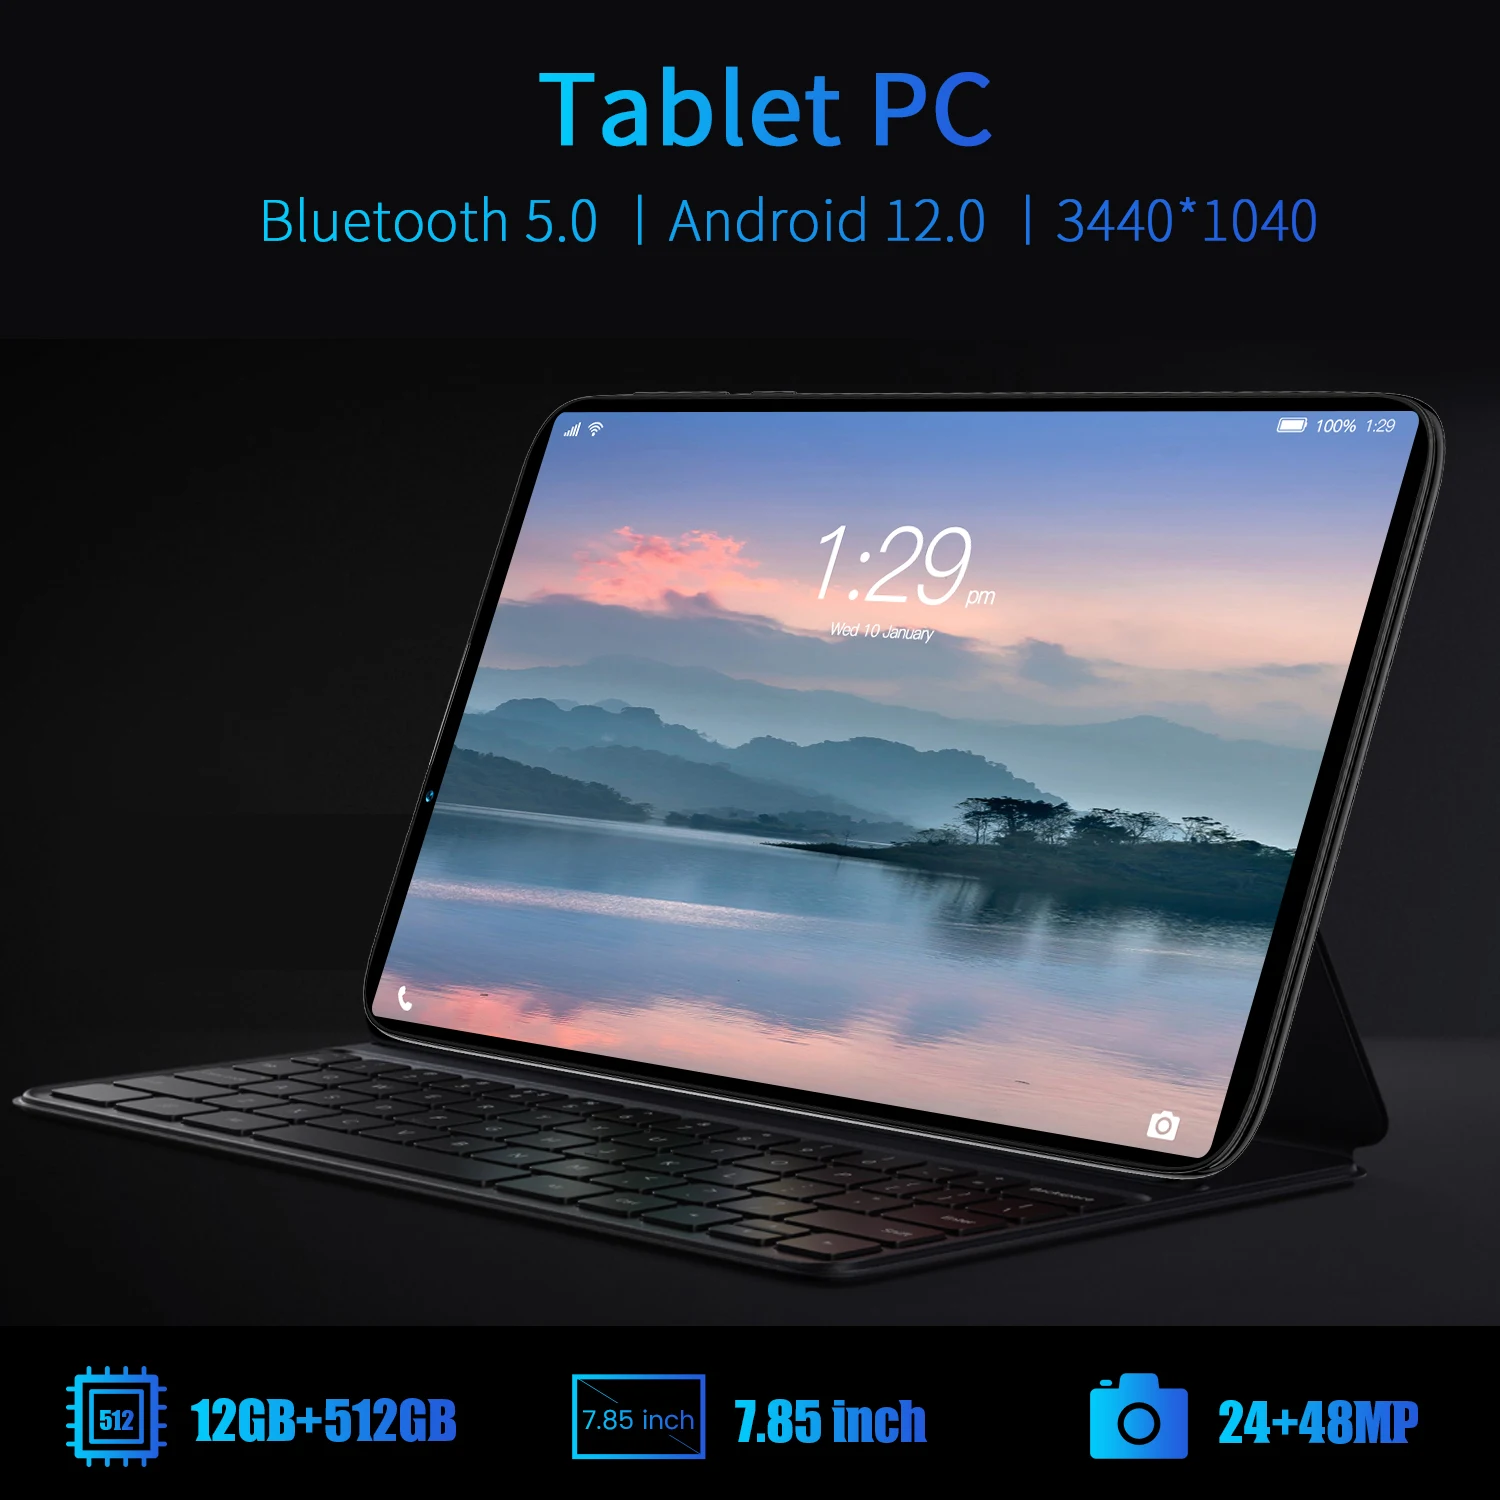 cheap note taking tablet 8Inch Pad M12 Tablette Android 12 Deca Core 12GB RAM 512GB ROM WPS Office Google Play Dual SIM GPS 48MP Rear Camera 5G Tablet PC newest tablet